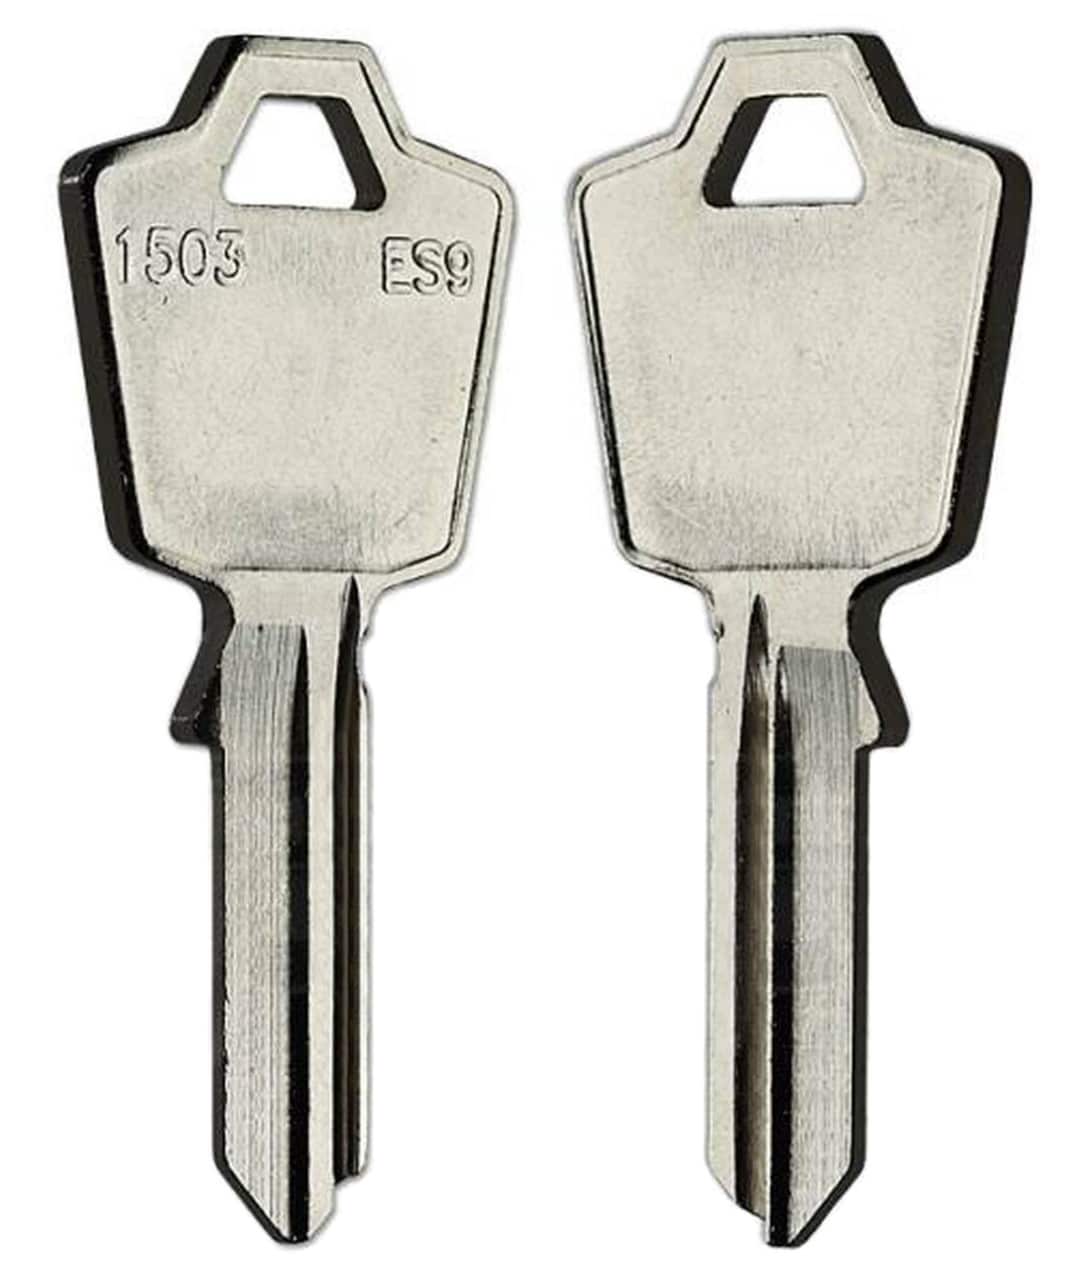 1503/ES9 key blank front and back